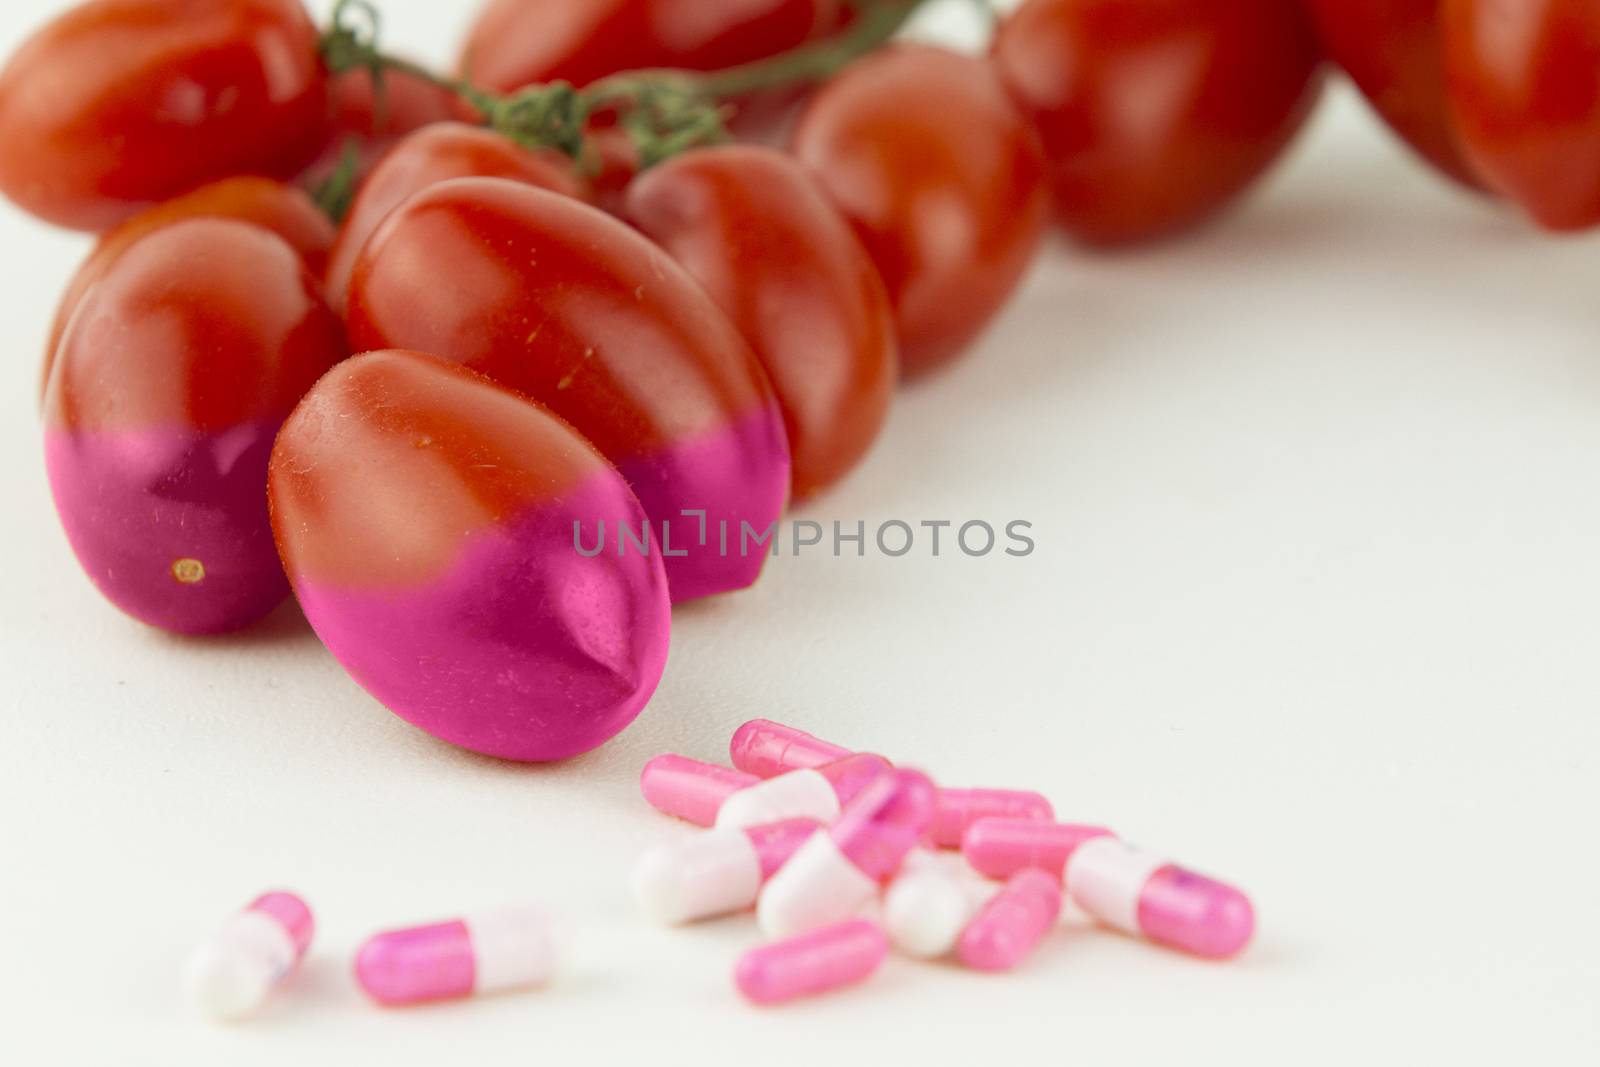 Concept: human GMO manipulation of nature and relative poisoned fruits. Close-up of three tomatoes contaminated by changing color from the medicines in front of it on a white background